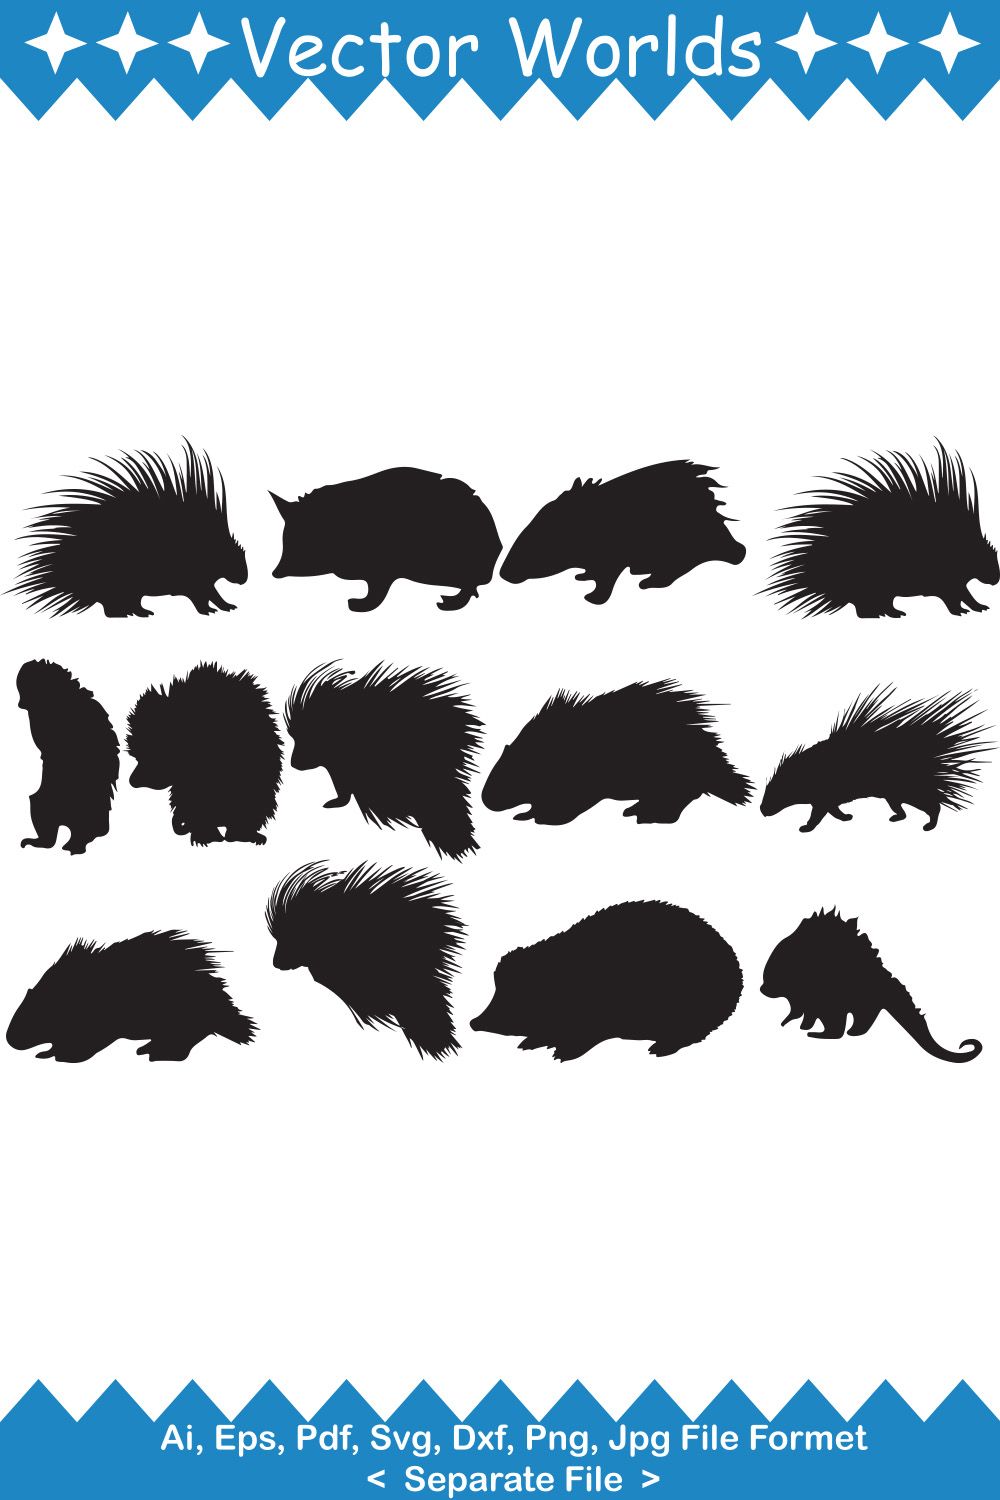 Set of silhouettes of different types of animals.